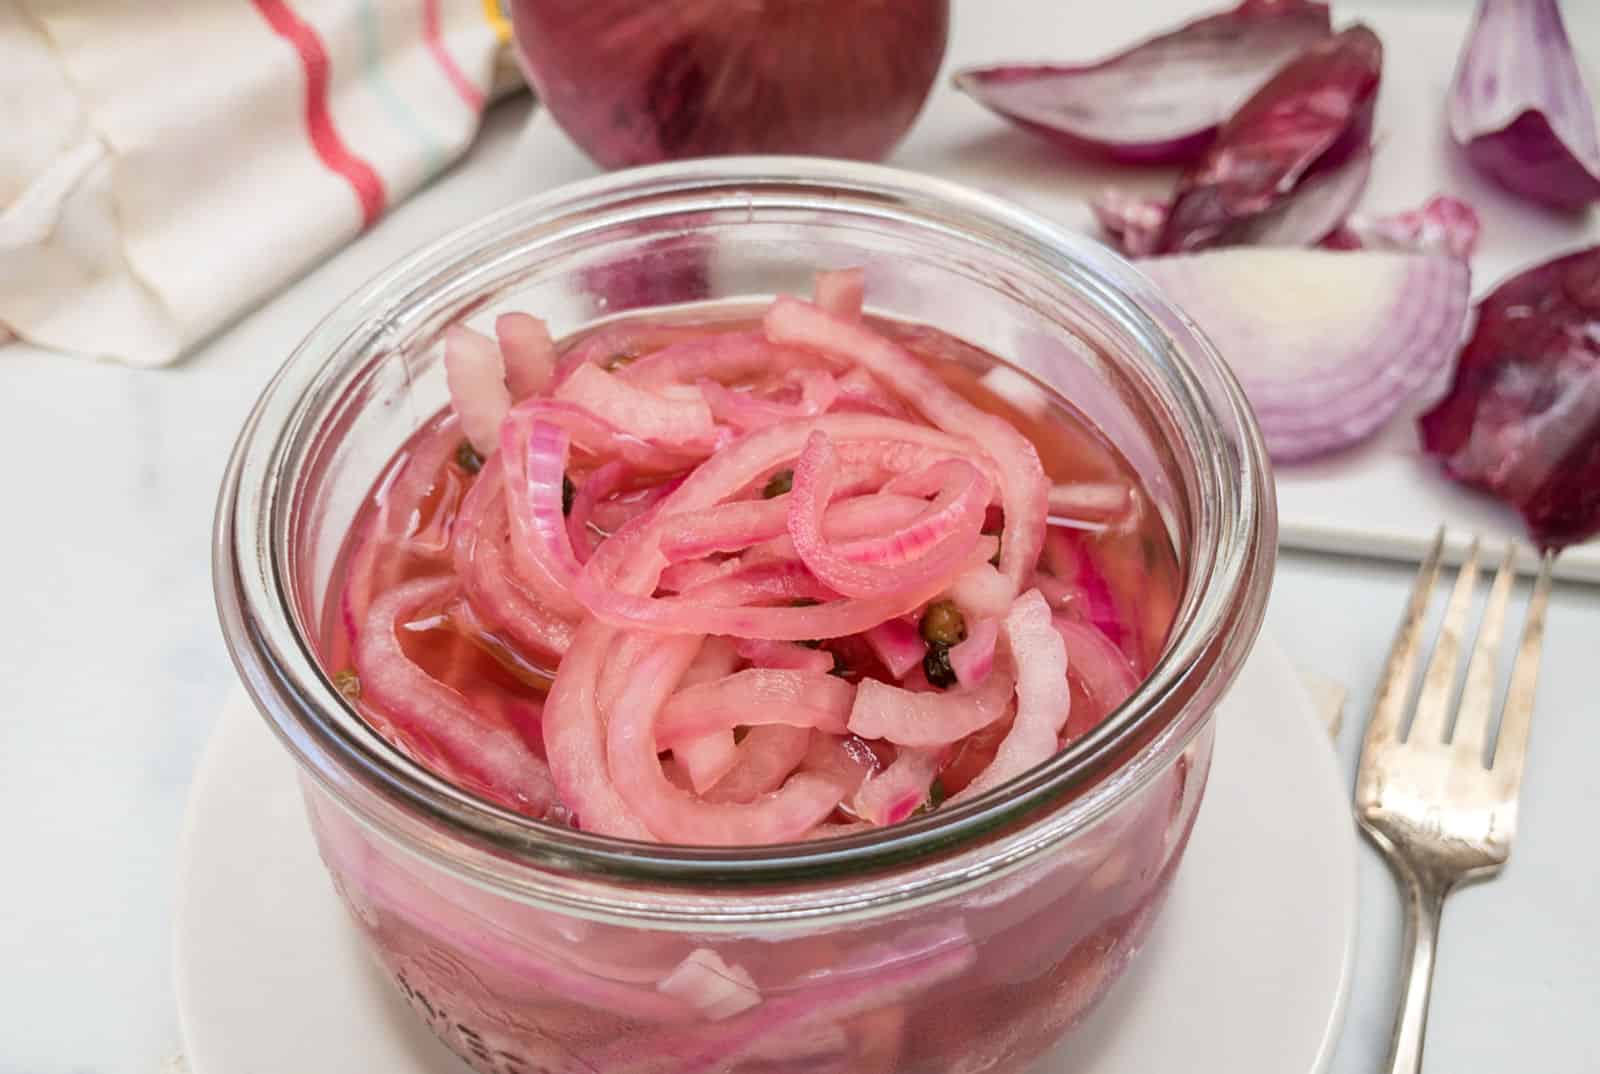 A jar of pickled red onions on a kitchen counter, with raw red onion slices and a fork nearby.